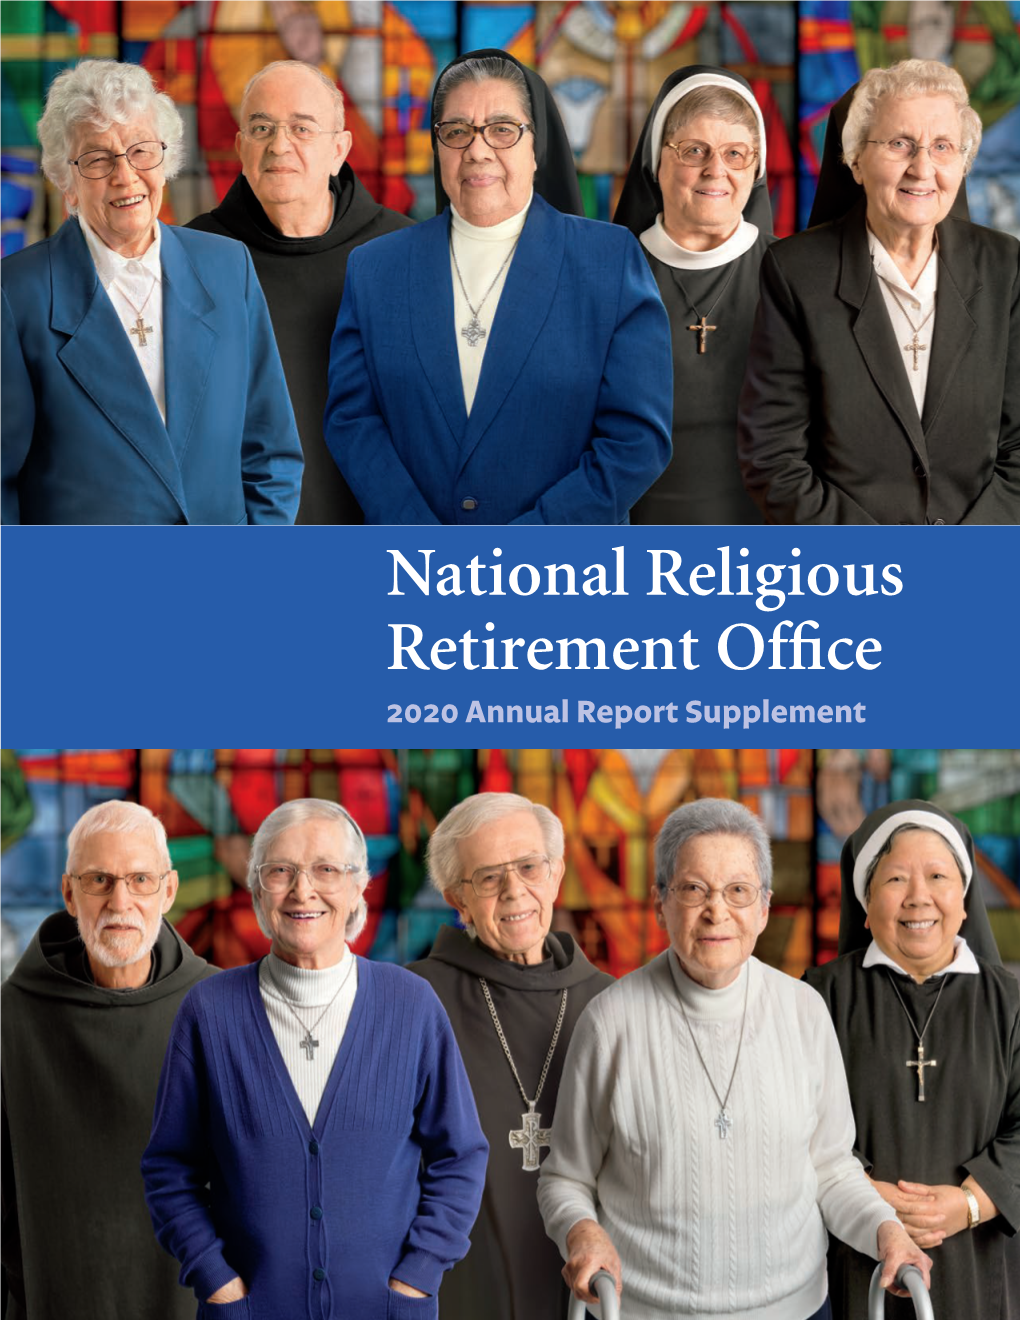 National Religious Retirement Office 2020 Annual Report Supplement